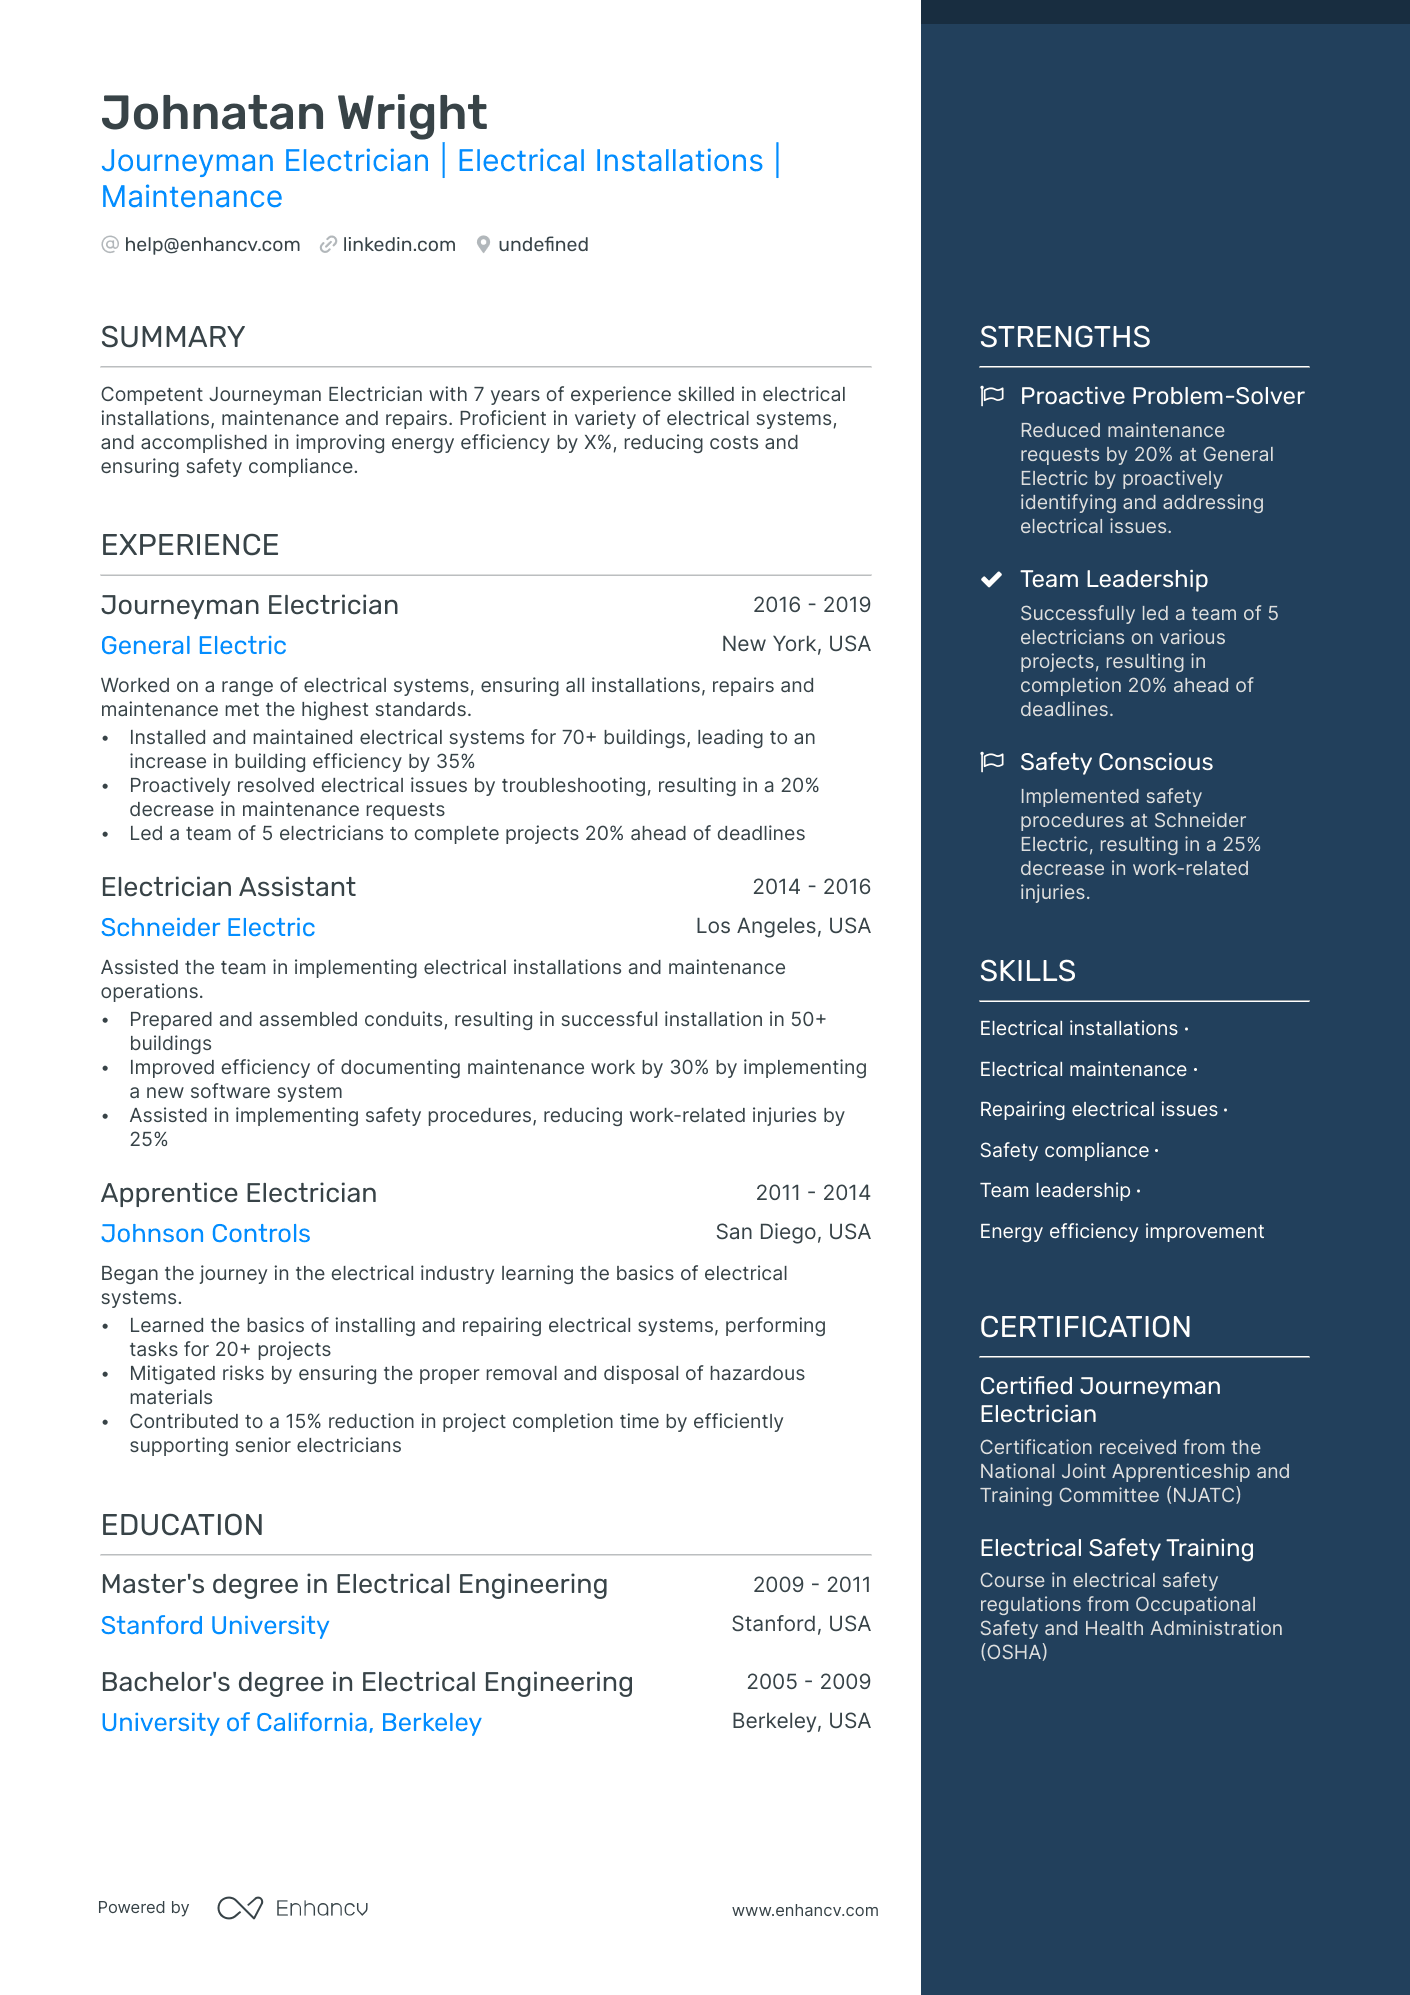 resume sample for electrician